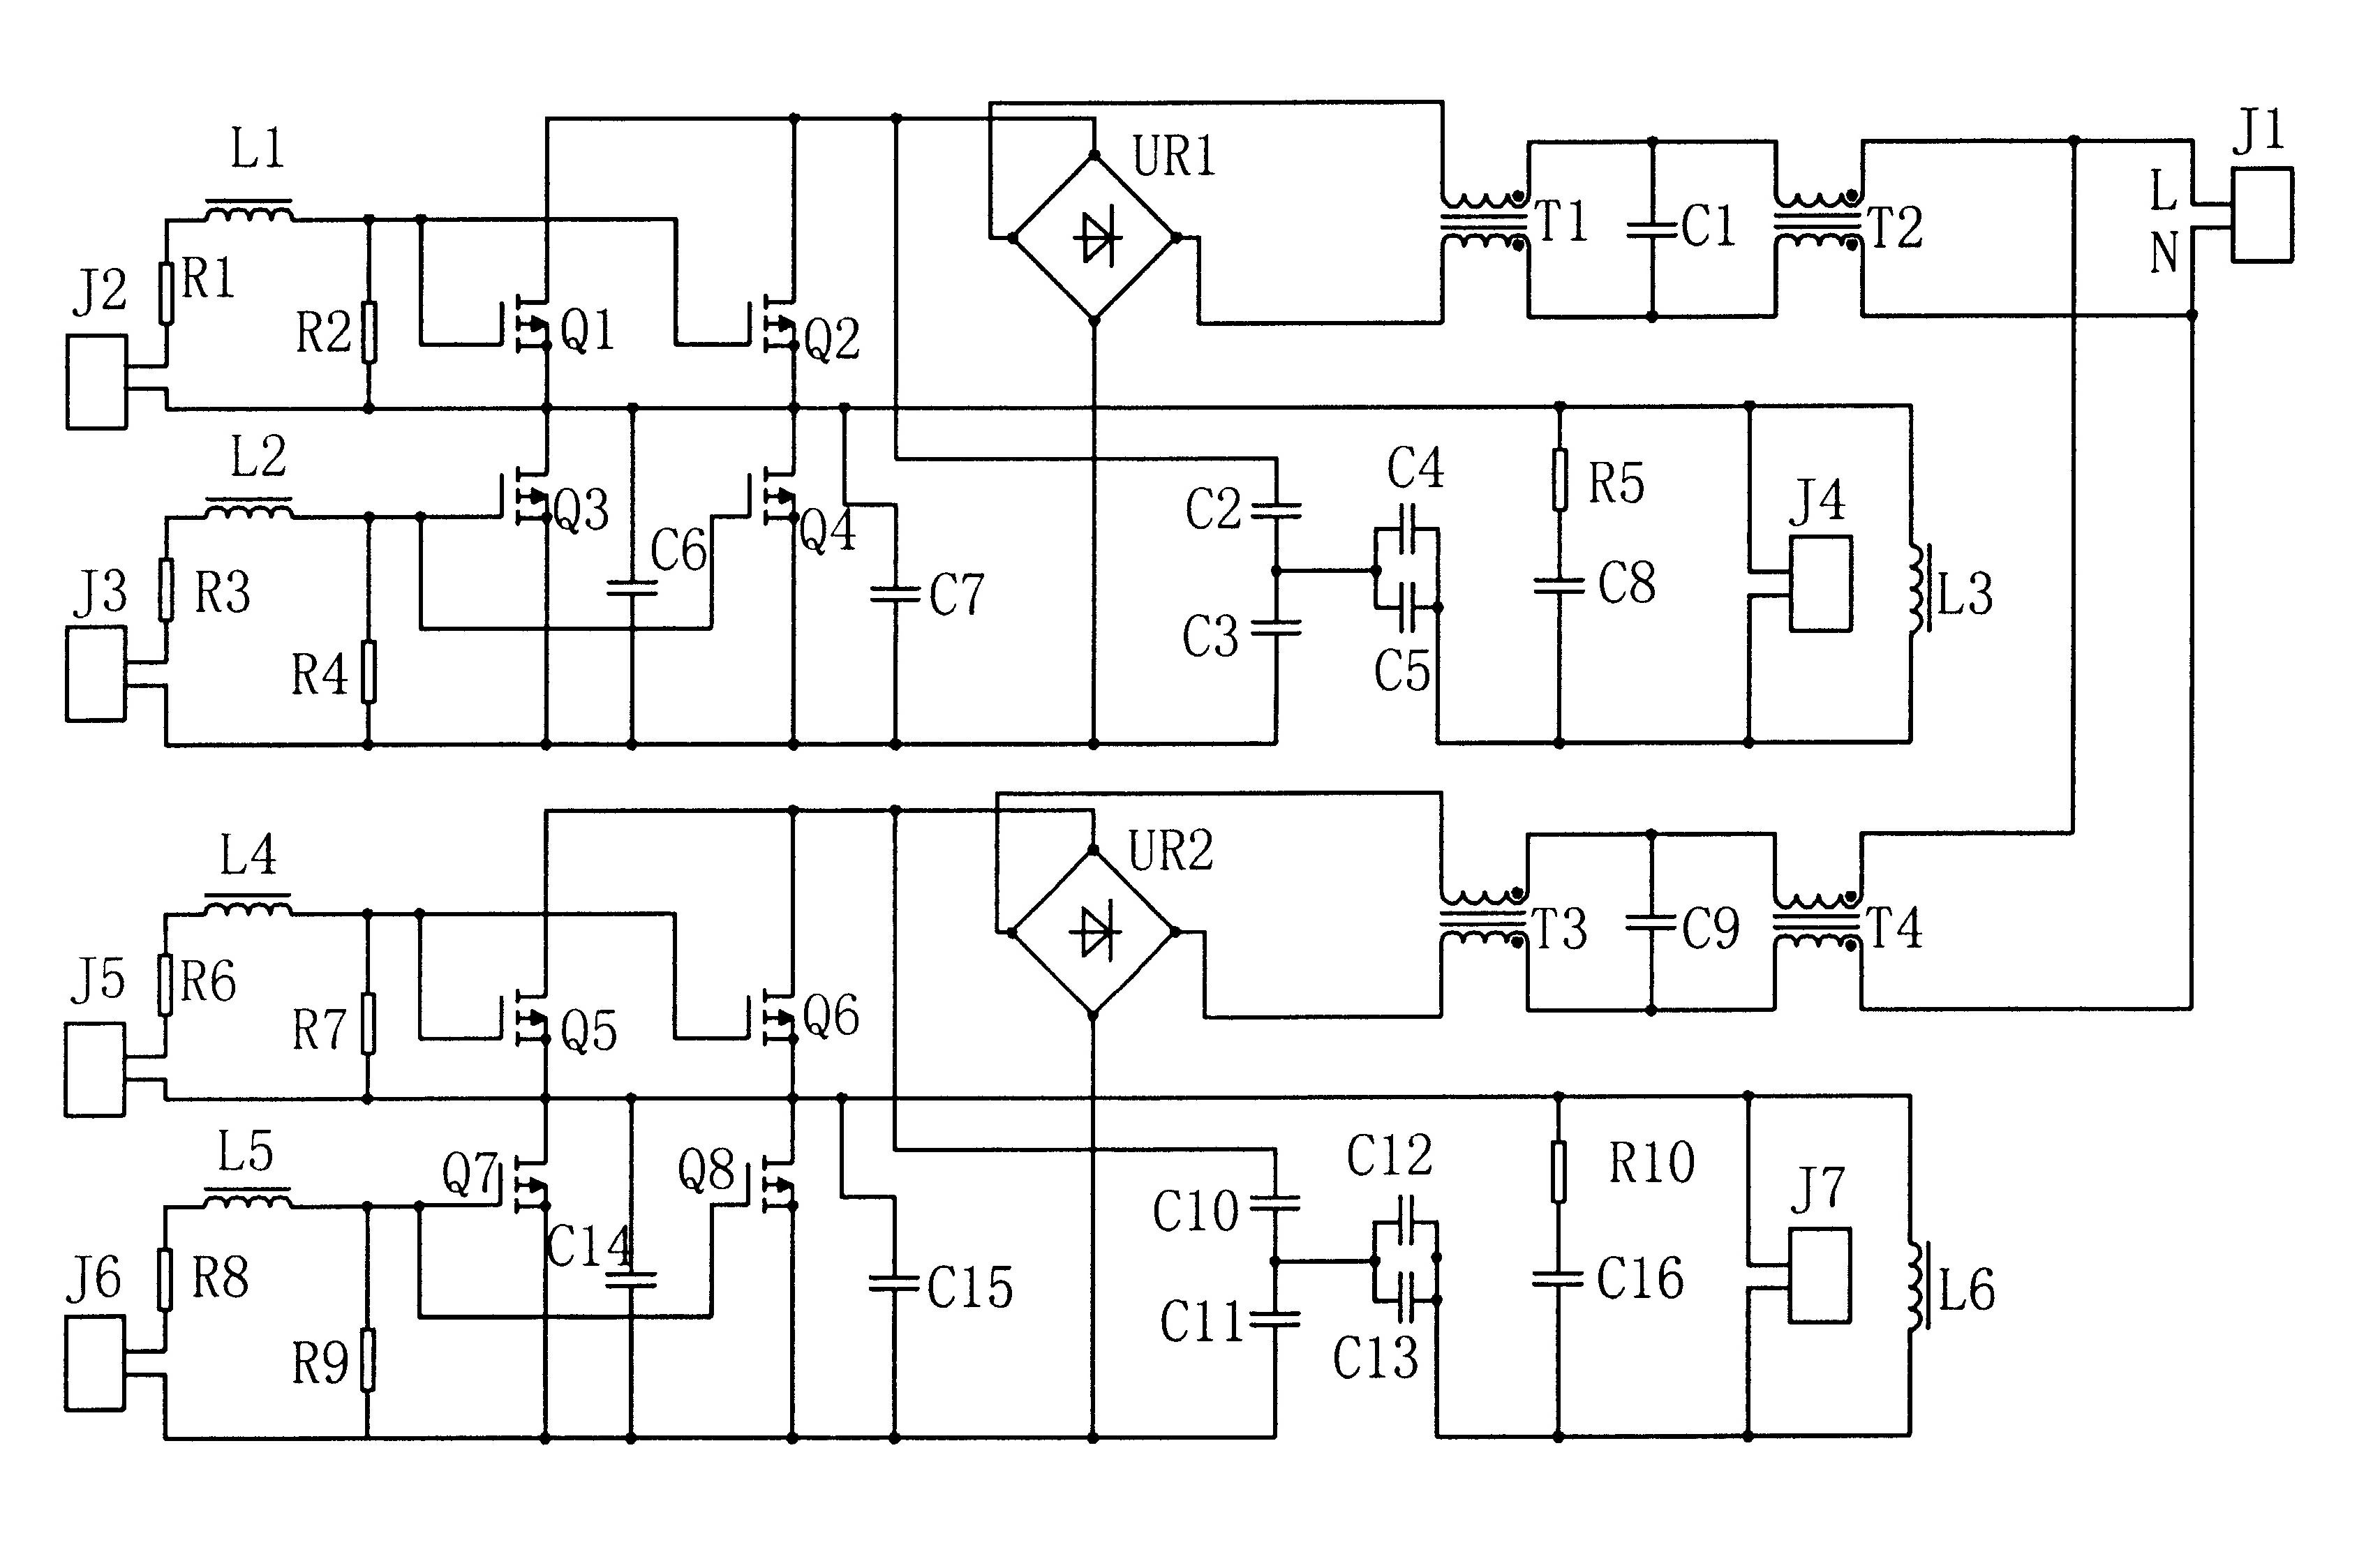 Water-circulating cooling device for instant electromagnetic water heater